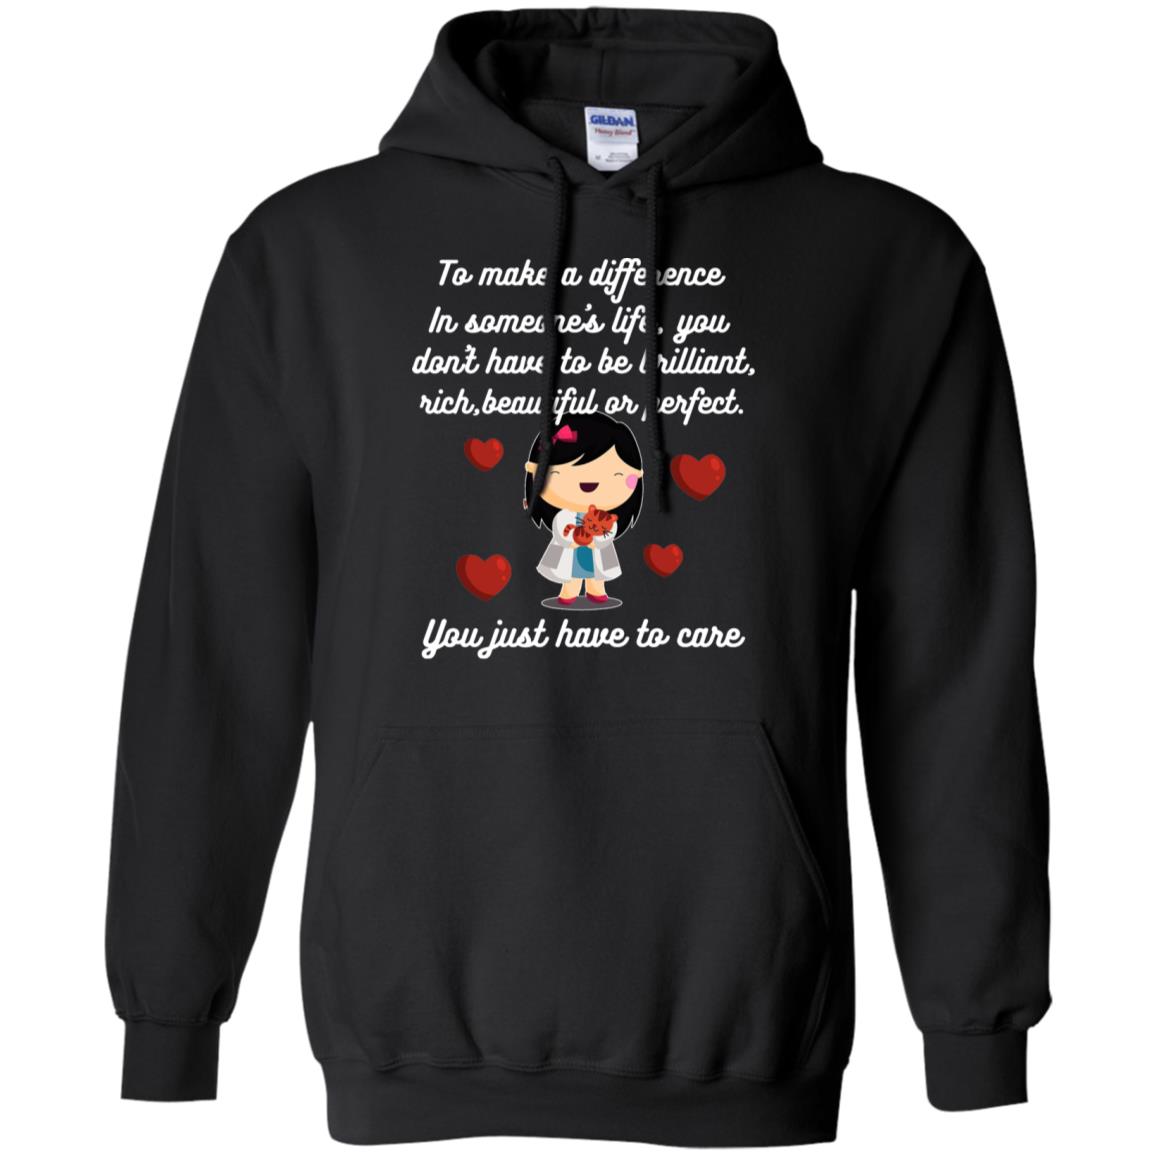 To Make A Difference In Someone's Life You Don't Have To Be Brilliant, Rich, Beautiful, Or Perfect. You Just Have To CareG185 Gildan Pullover Hoodie 8 oz.